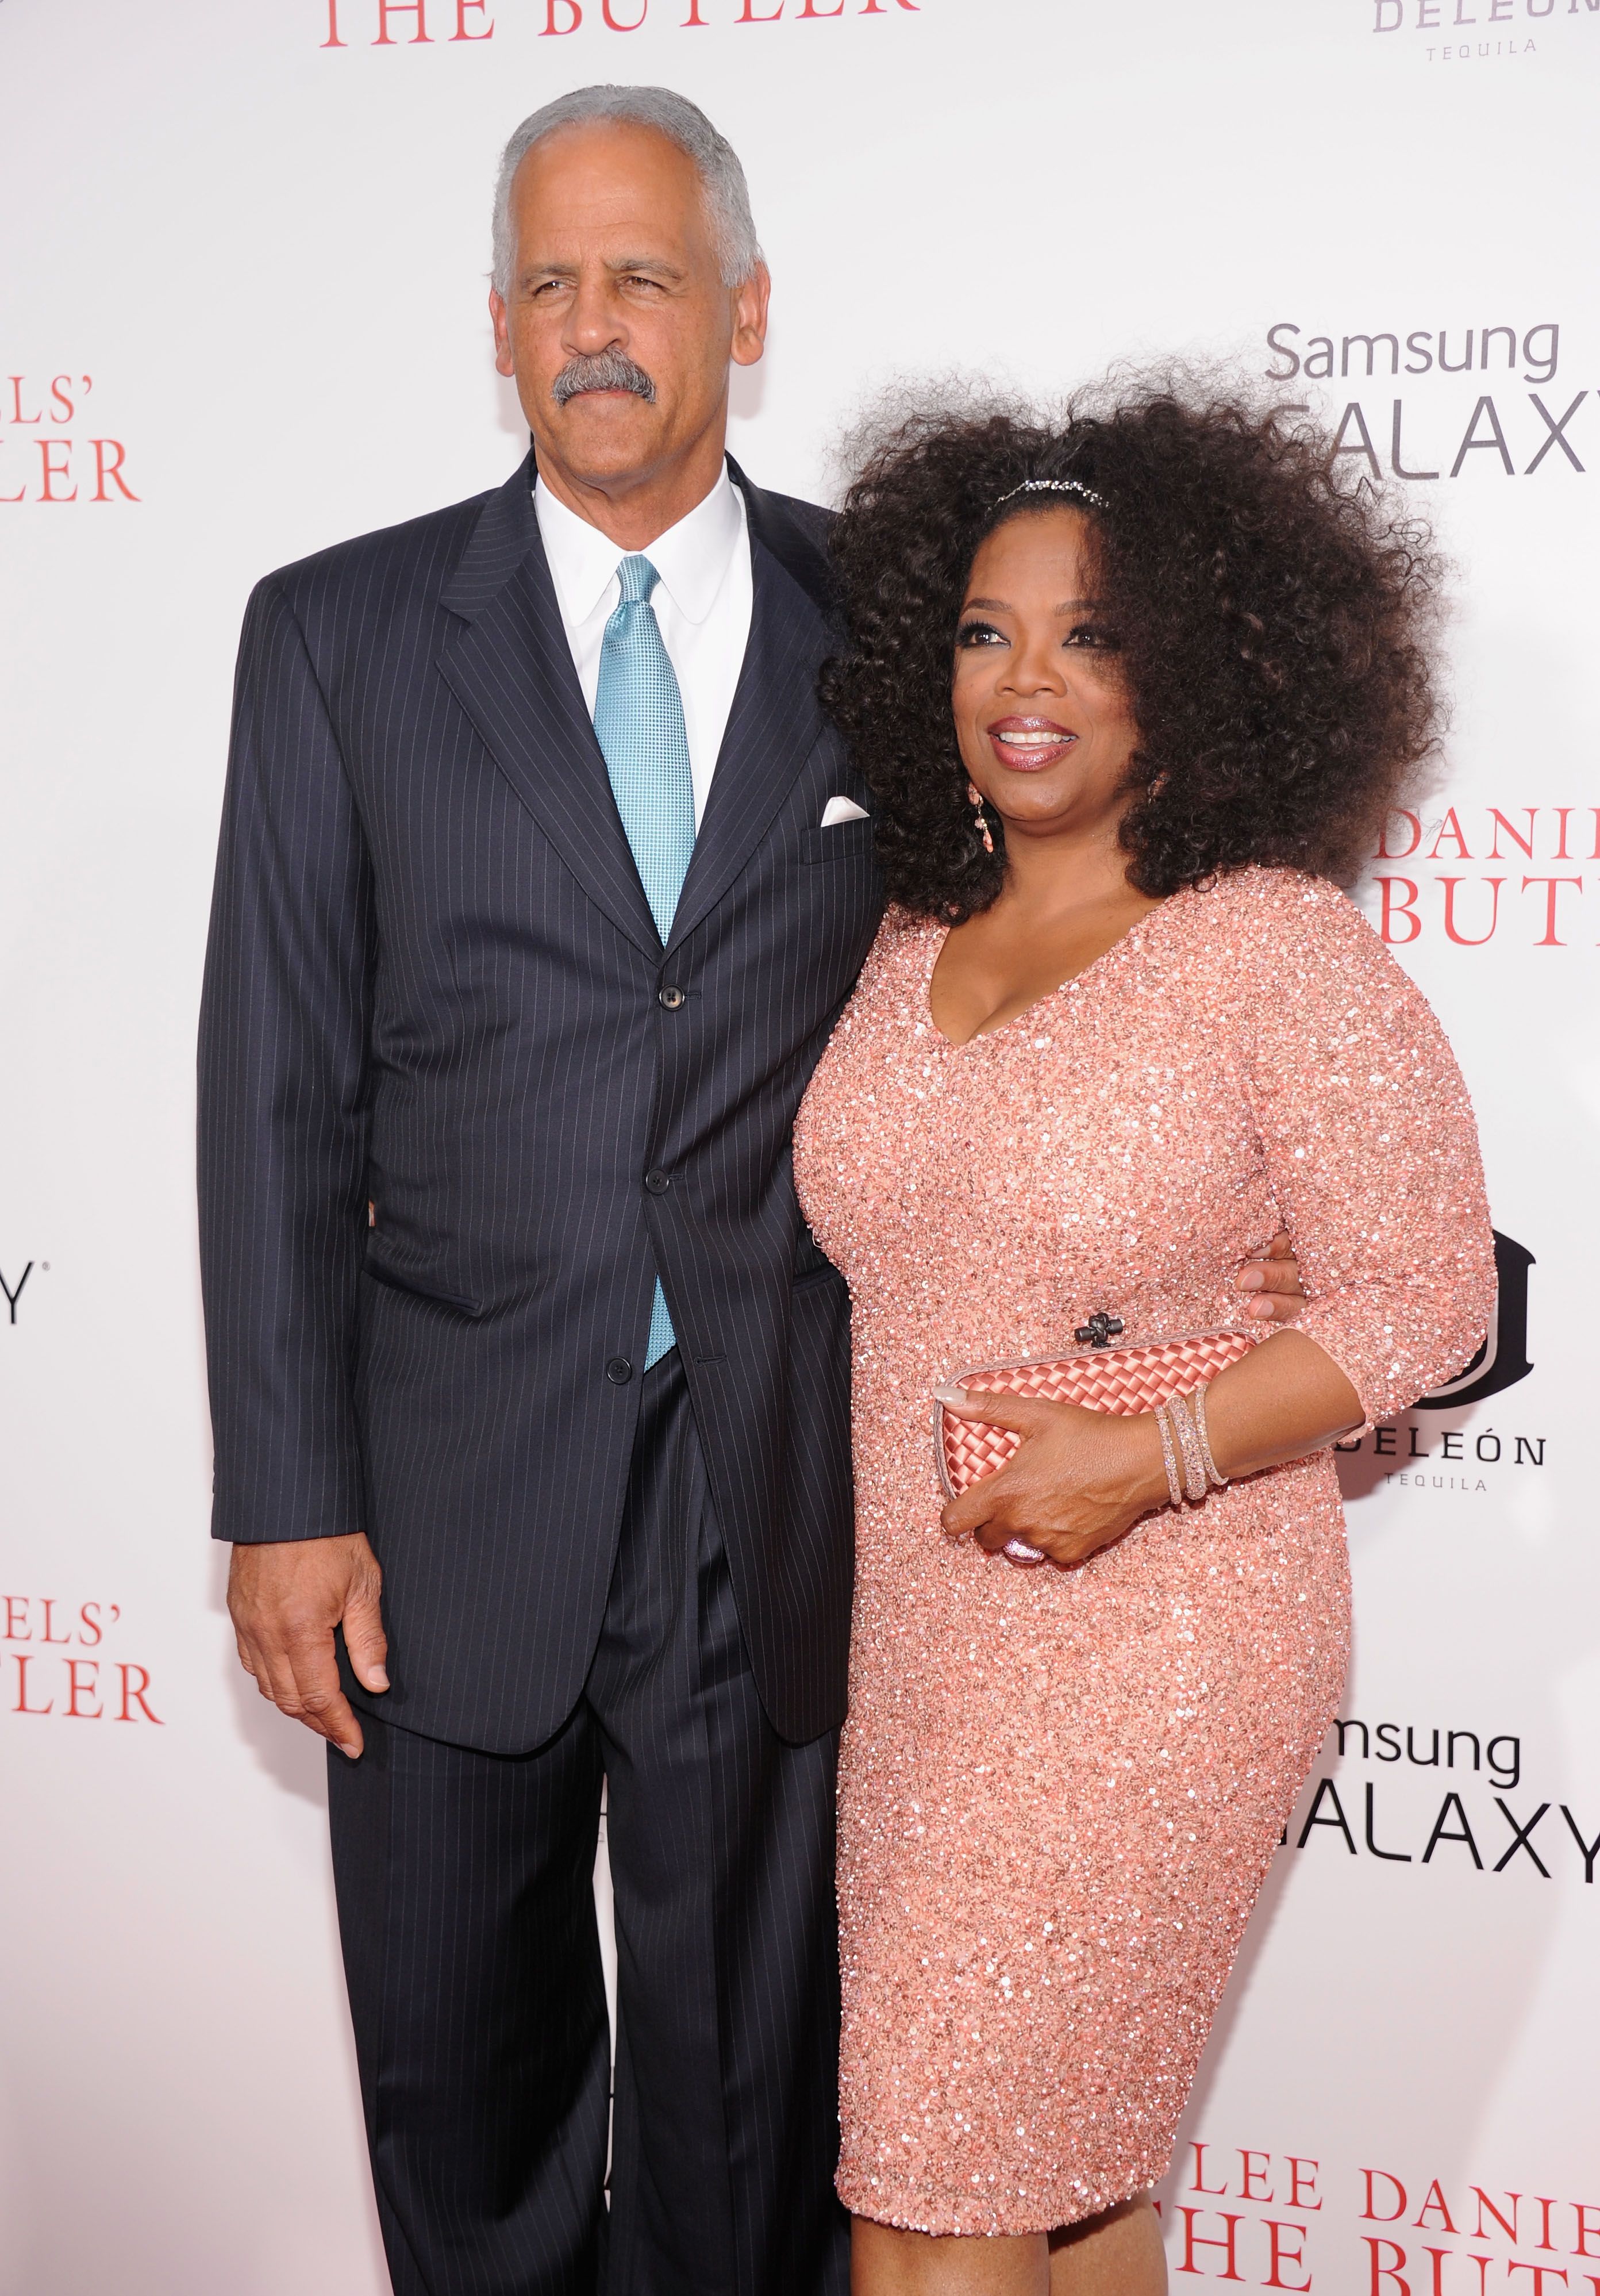 Oprah Winfrey and Stedman Graham attend Lee Daniels' "The Butler" New York Premiere. | Source: Getty Images